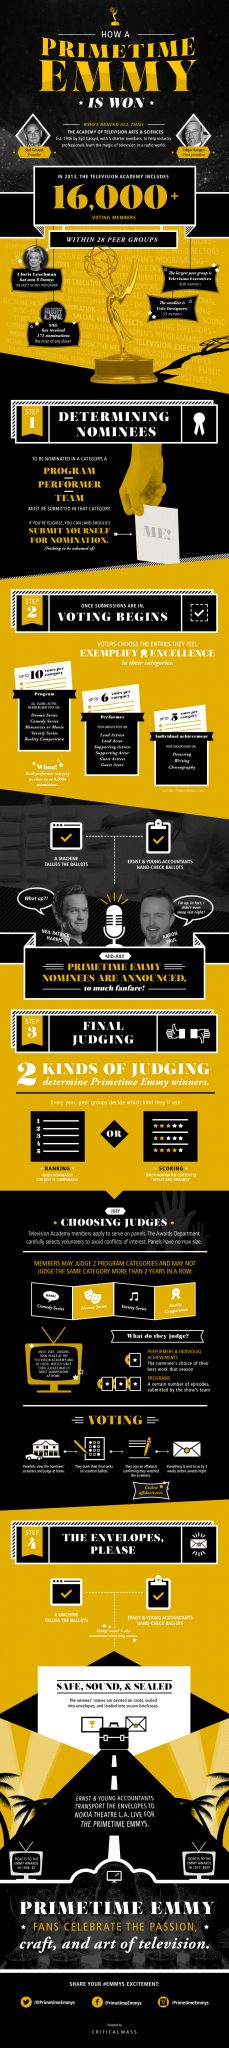 how-a-primetime-emmy-is-won-infographic